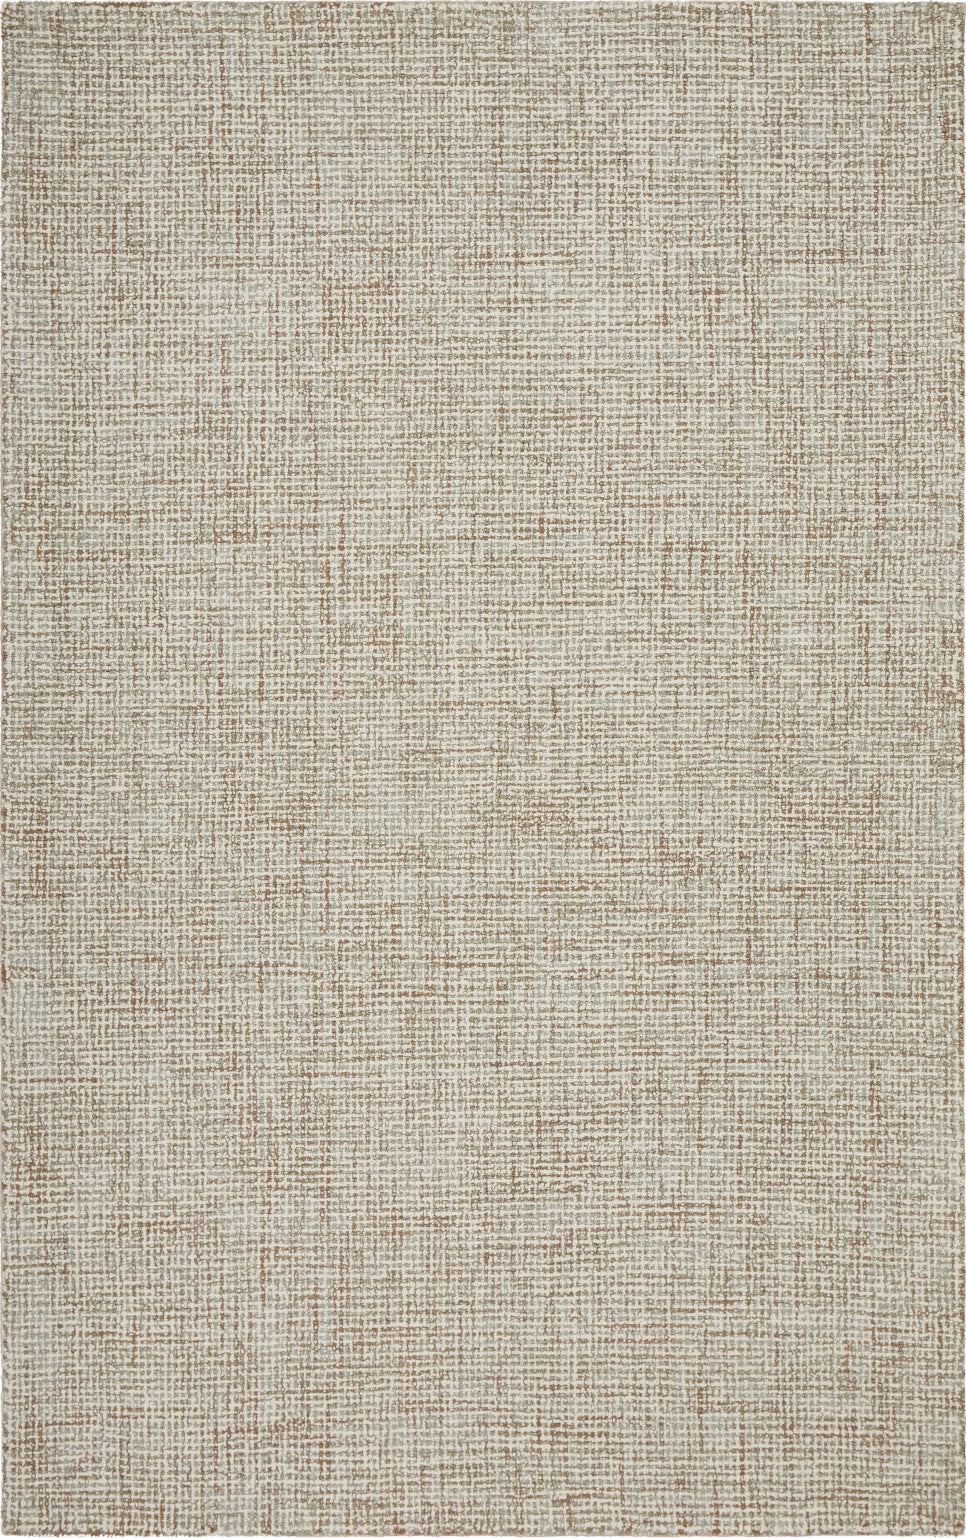 LR Resources Criss Cross 81298 Taupe / Teal Area Rug main image